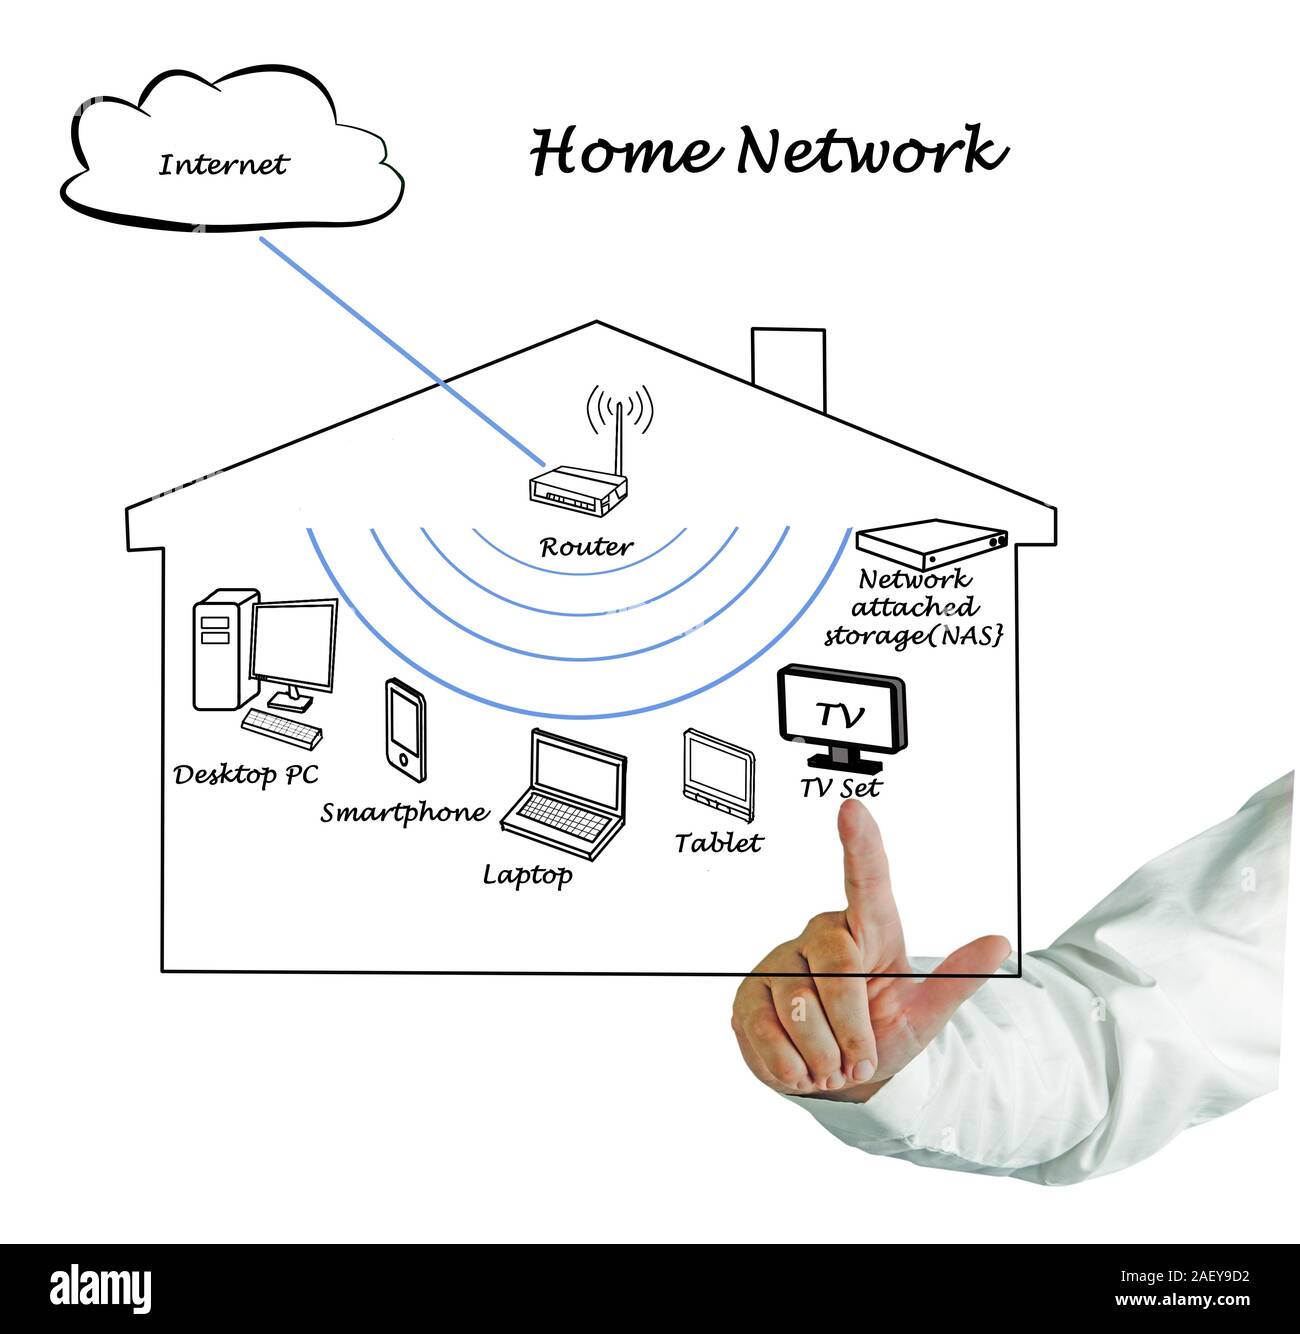 Home Network Stock Photo